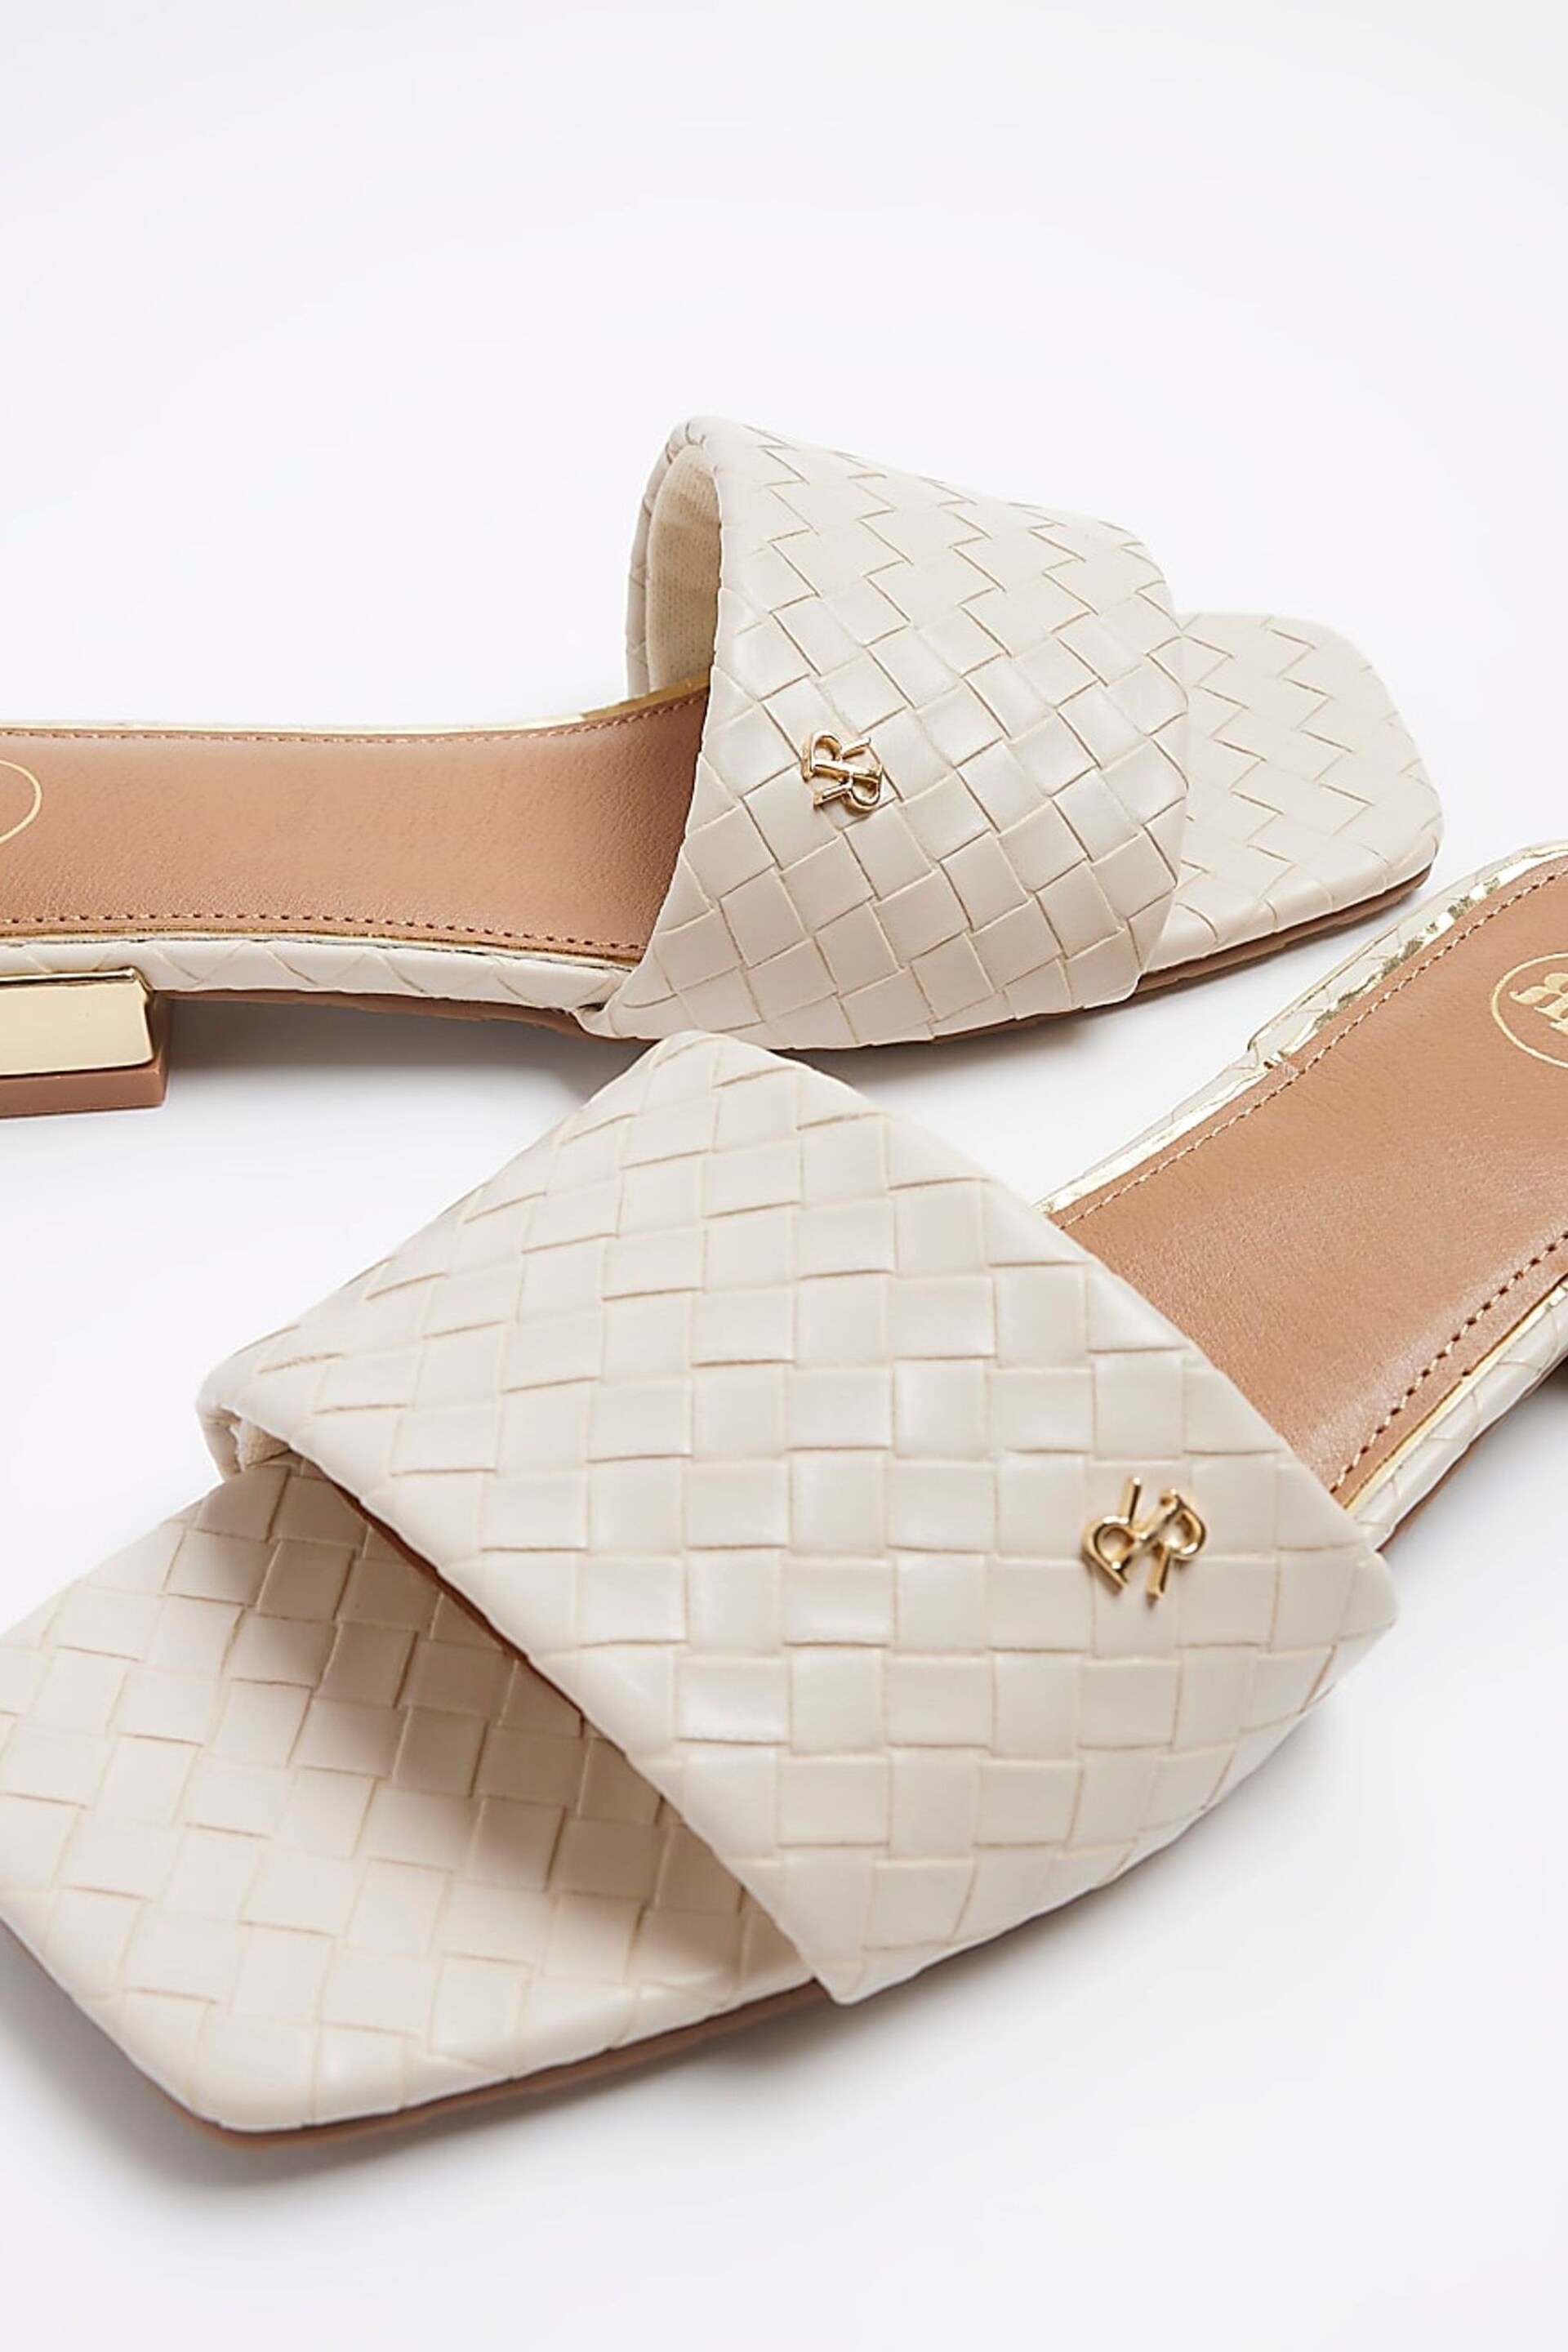 River Island Cream Wide Fit Woven Mule Flat Sandals - Image 6 of 6